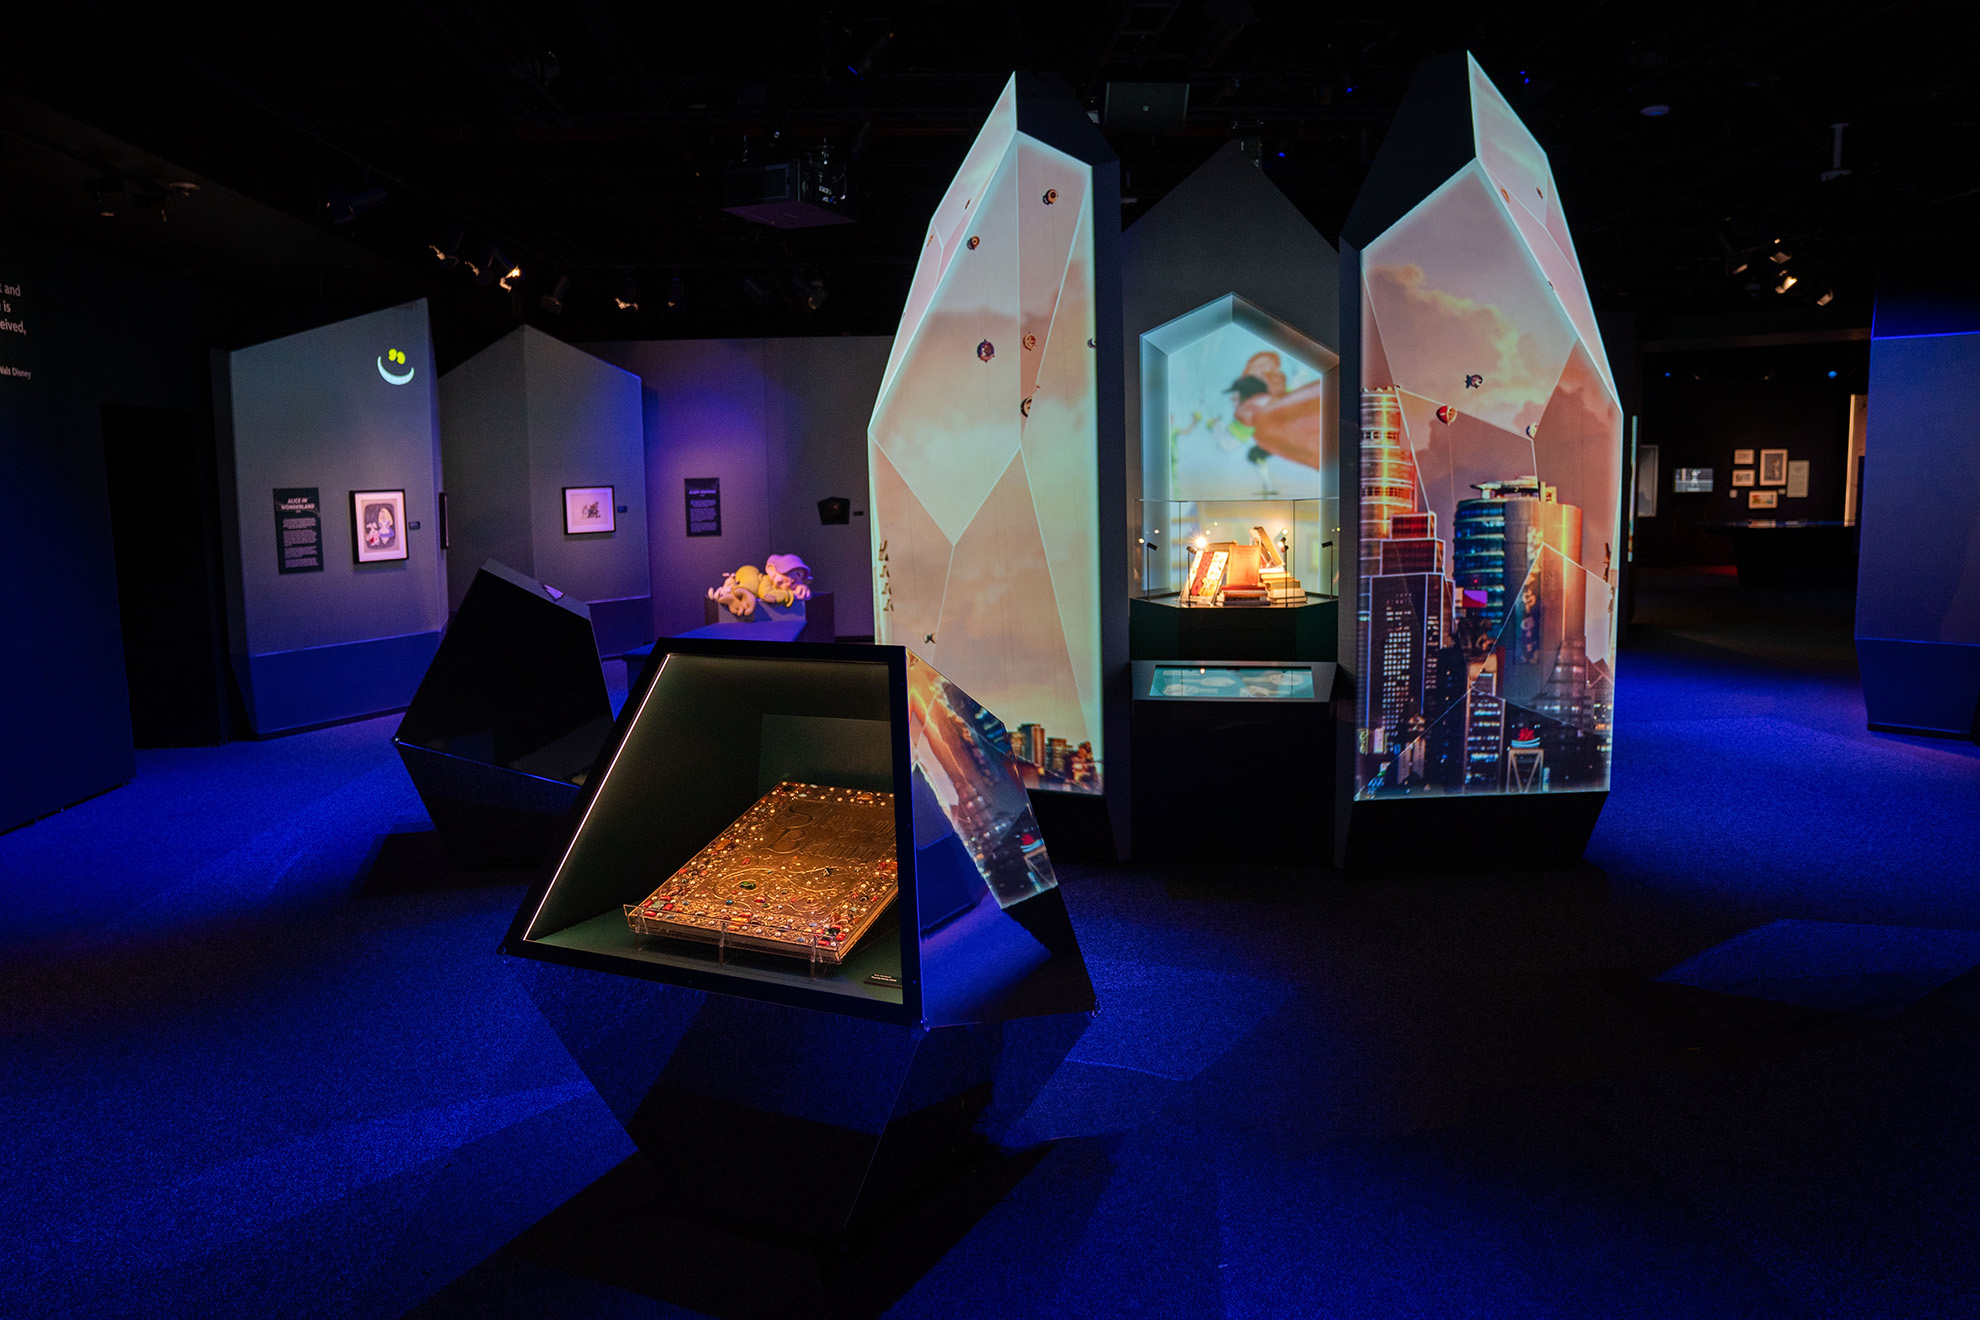 Where Do the Stories Come From? gallery at Disney100: The Exhibition, now open at The Franklin Institute in Philadelphia.